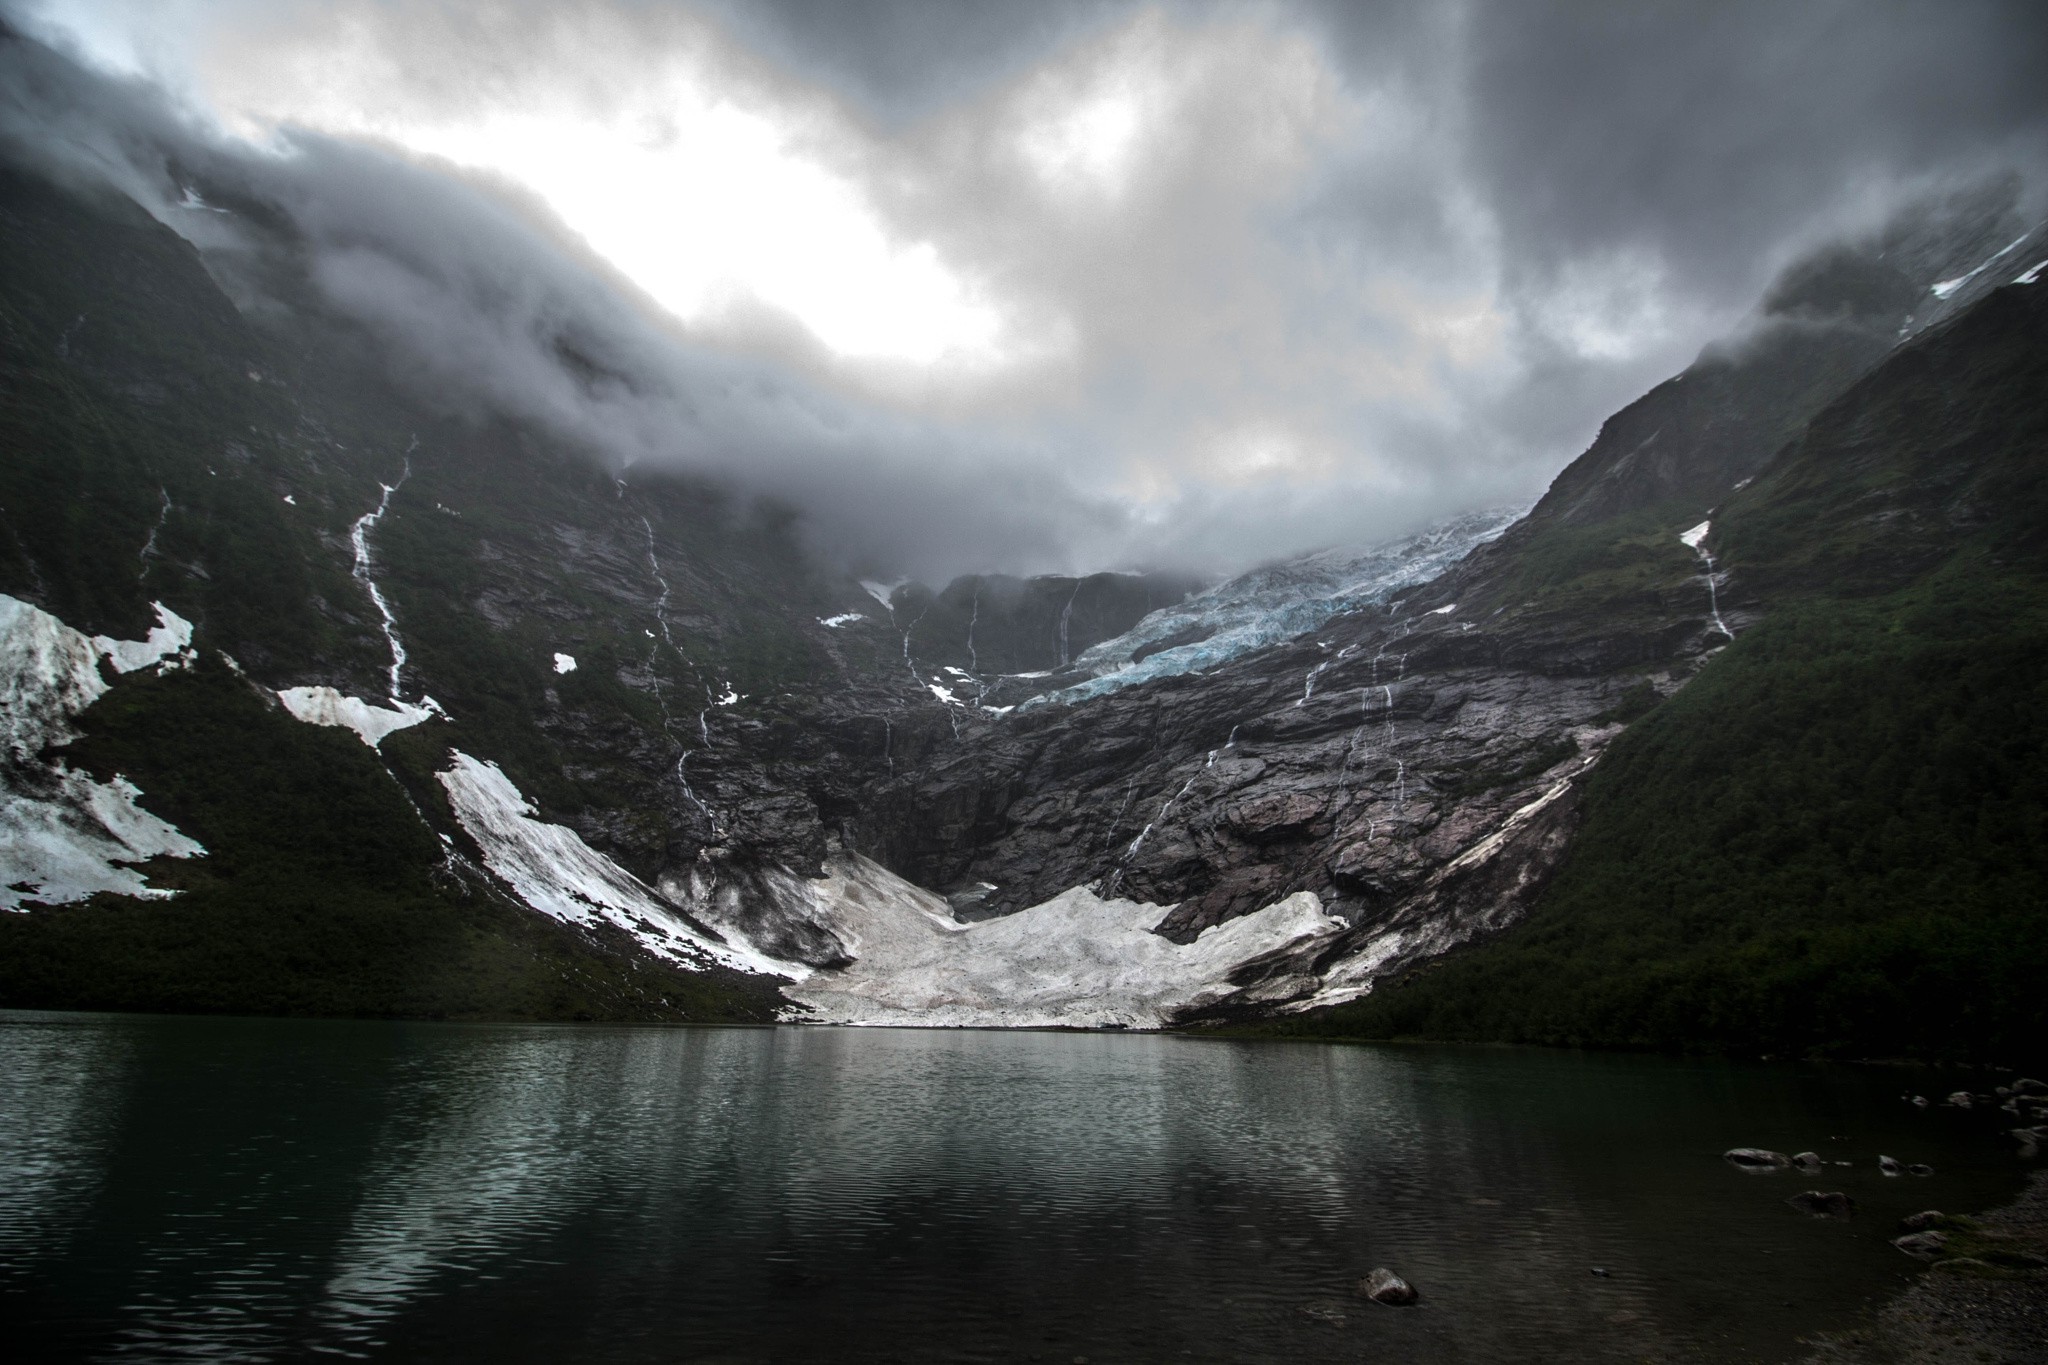 Wallpaper, landscape, dark, lake, nature, reflection, clouds, glaciers, Norway, fjord, valley, Alps, creeks, cloud, highland, 2048x1365 px, glacier, loch, atmospheric phenomenon, mountainous landforms, geographical feature, mountain range, glacial